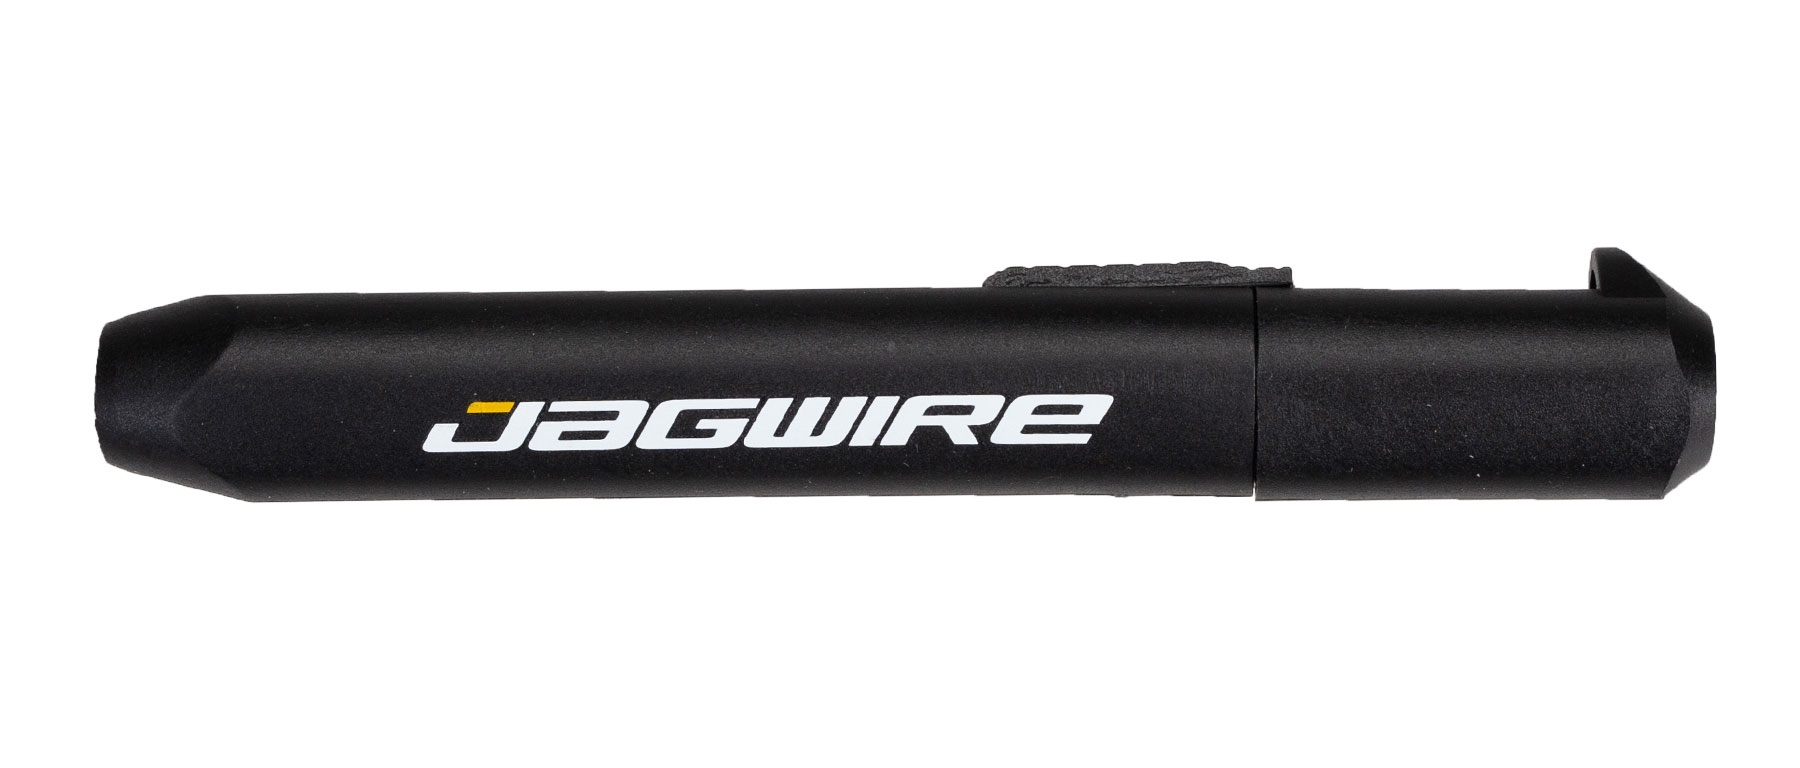 Jagwire Pro Internal Cable Routing Tool